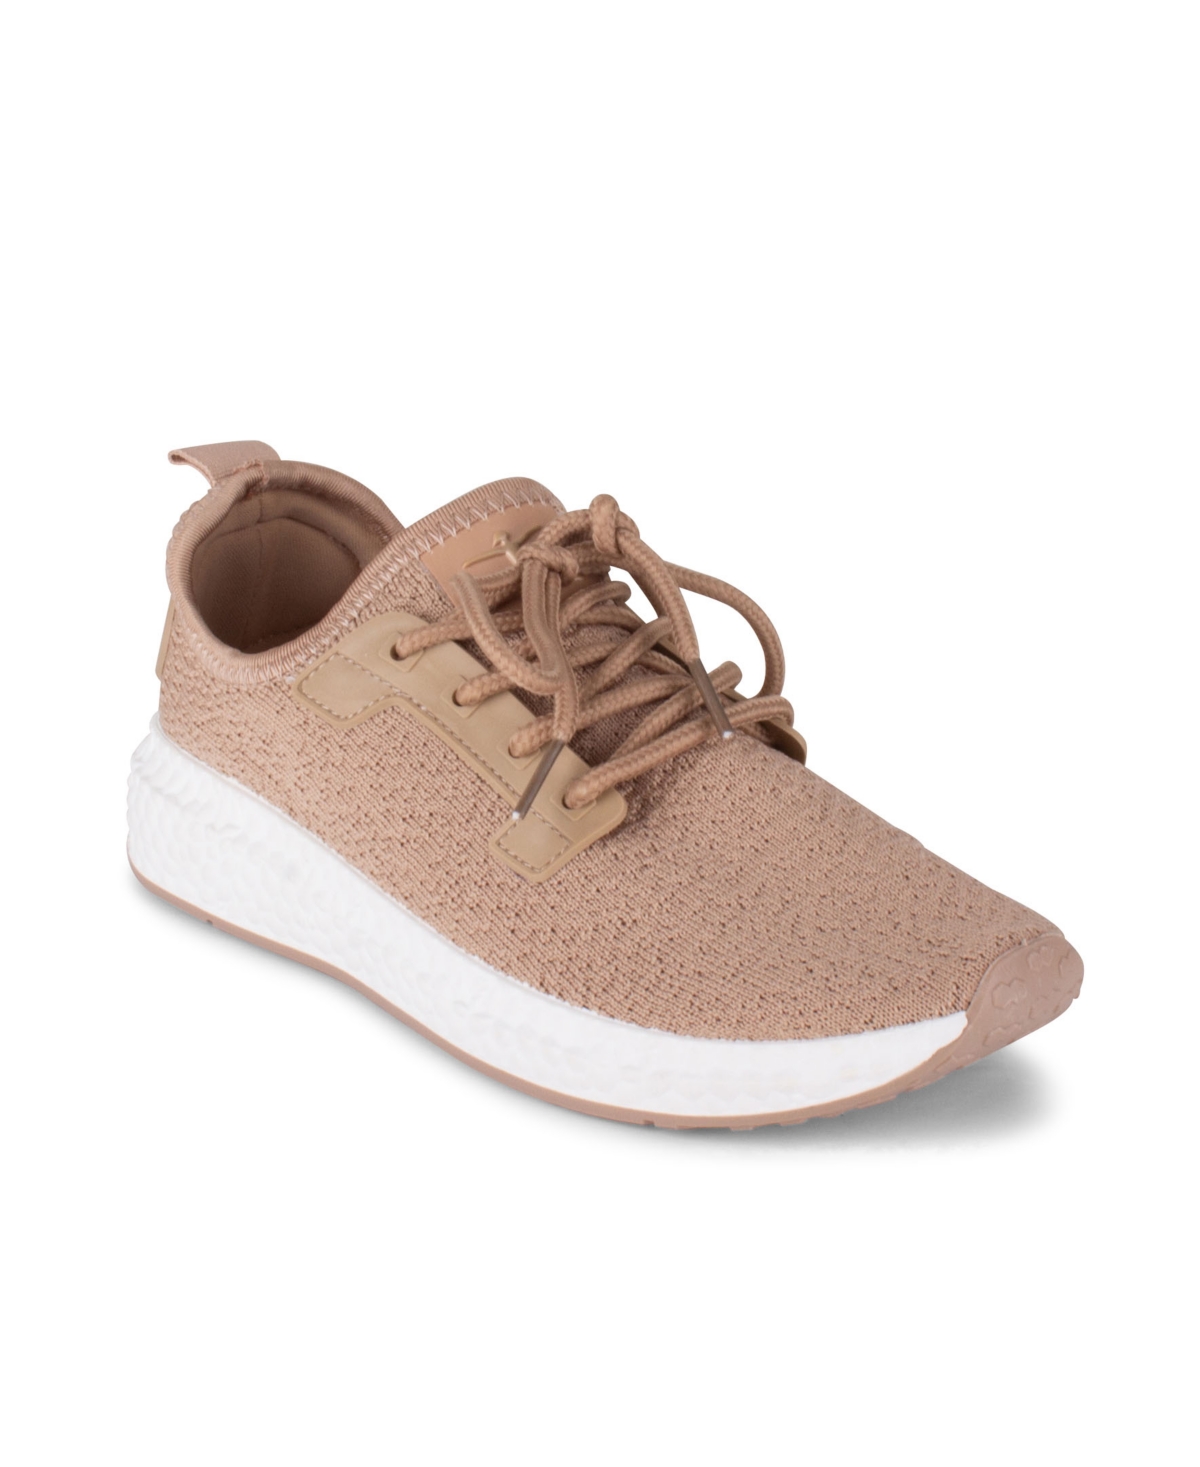 Women's Vibe Lace-up Sneaker - White